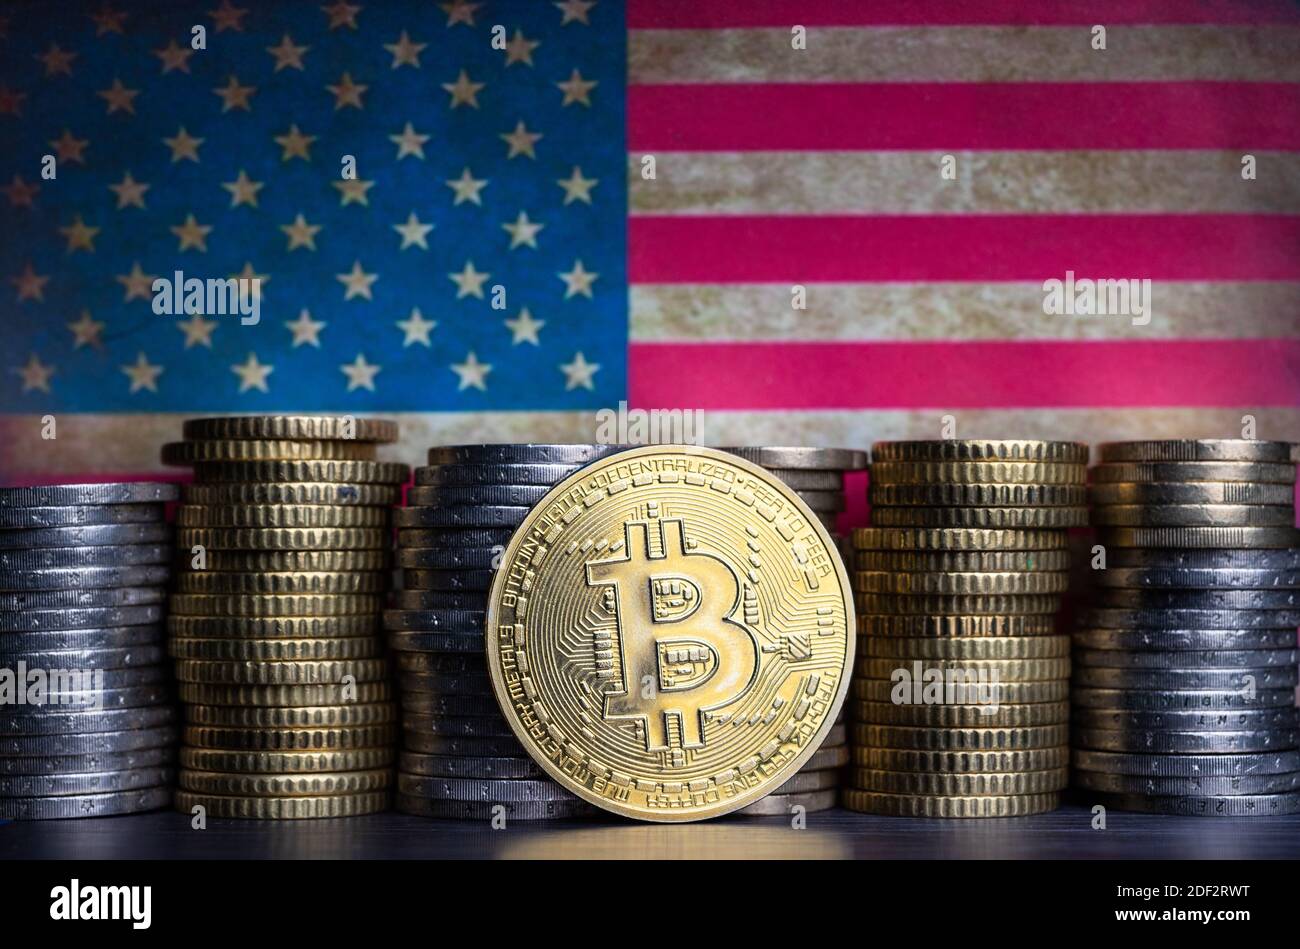 Bitcoin token infront of currency coins and grungy flag of the united states. Stock Photo